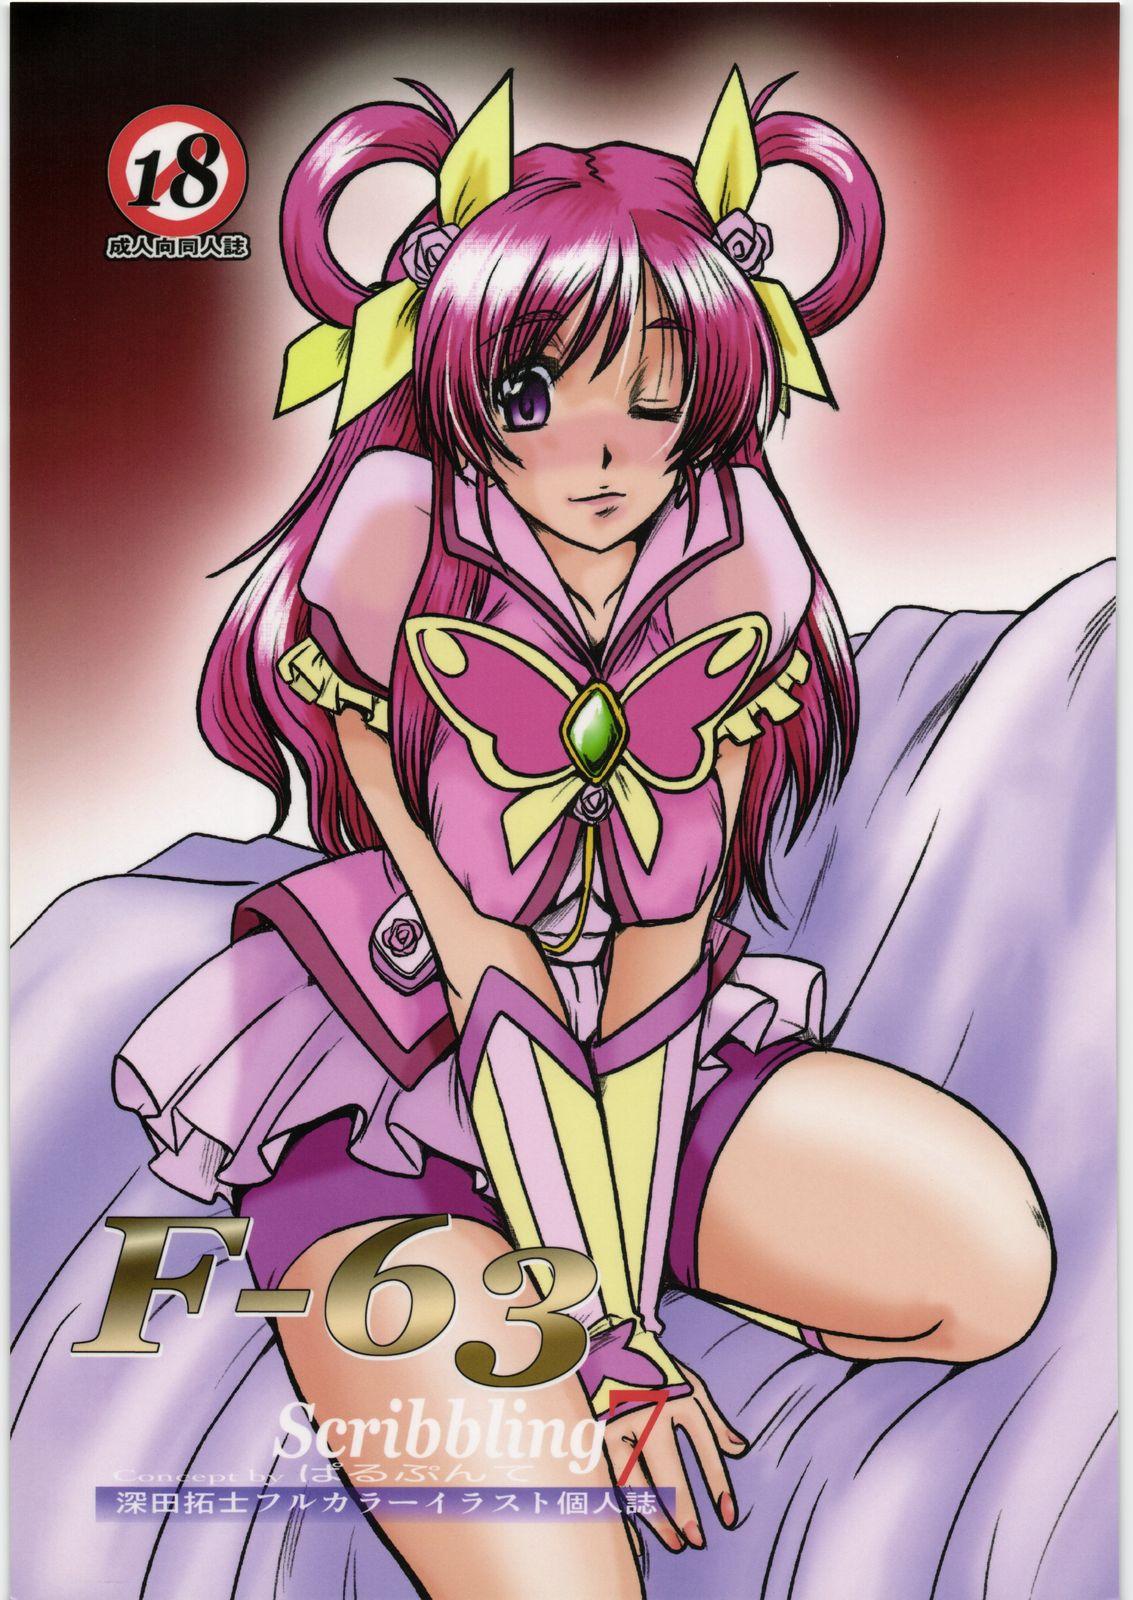 Pija F-63 Scribbling 7 - Yes precure 5 Ass Fuck - Picture 1